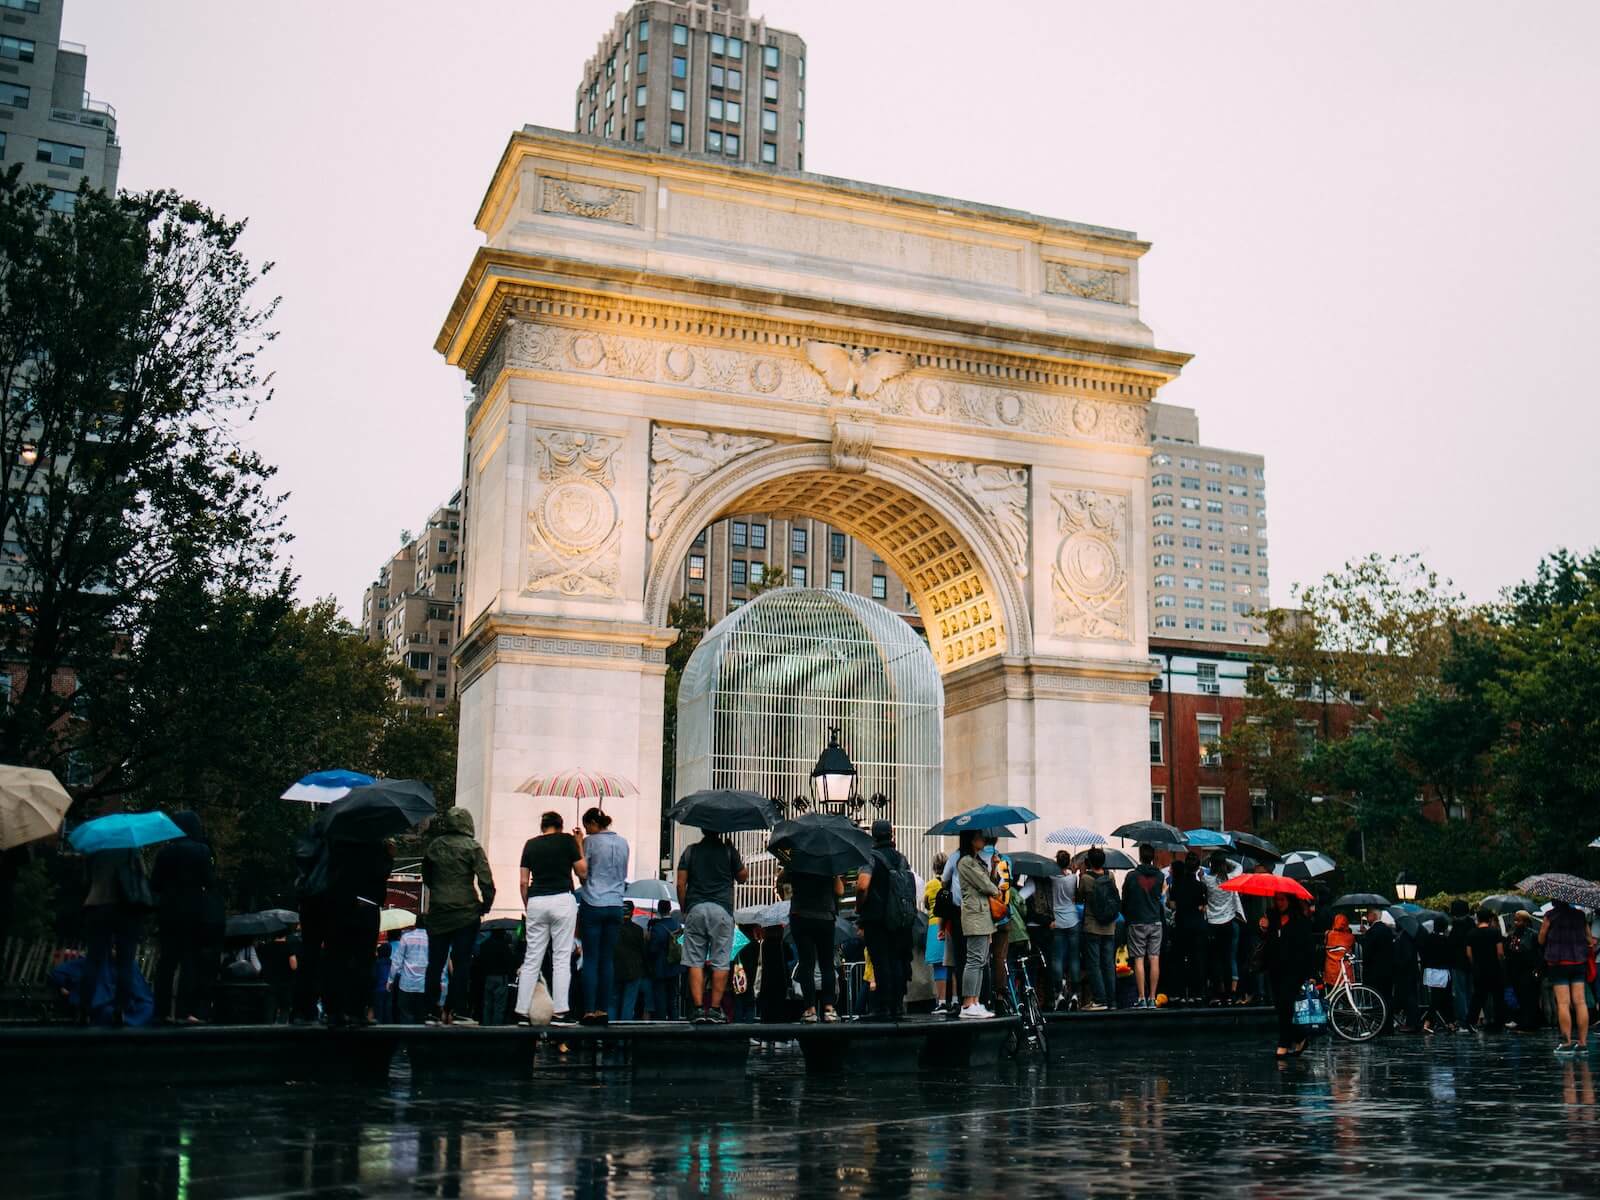 A rainy day in Washington Square Park in Greenwich Village